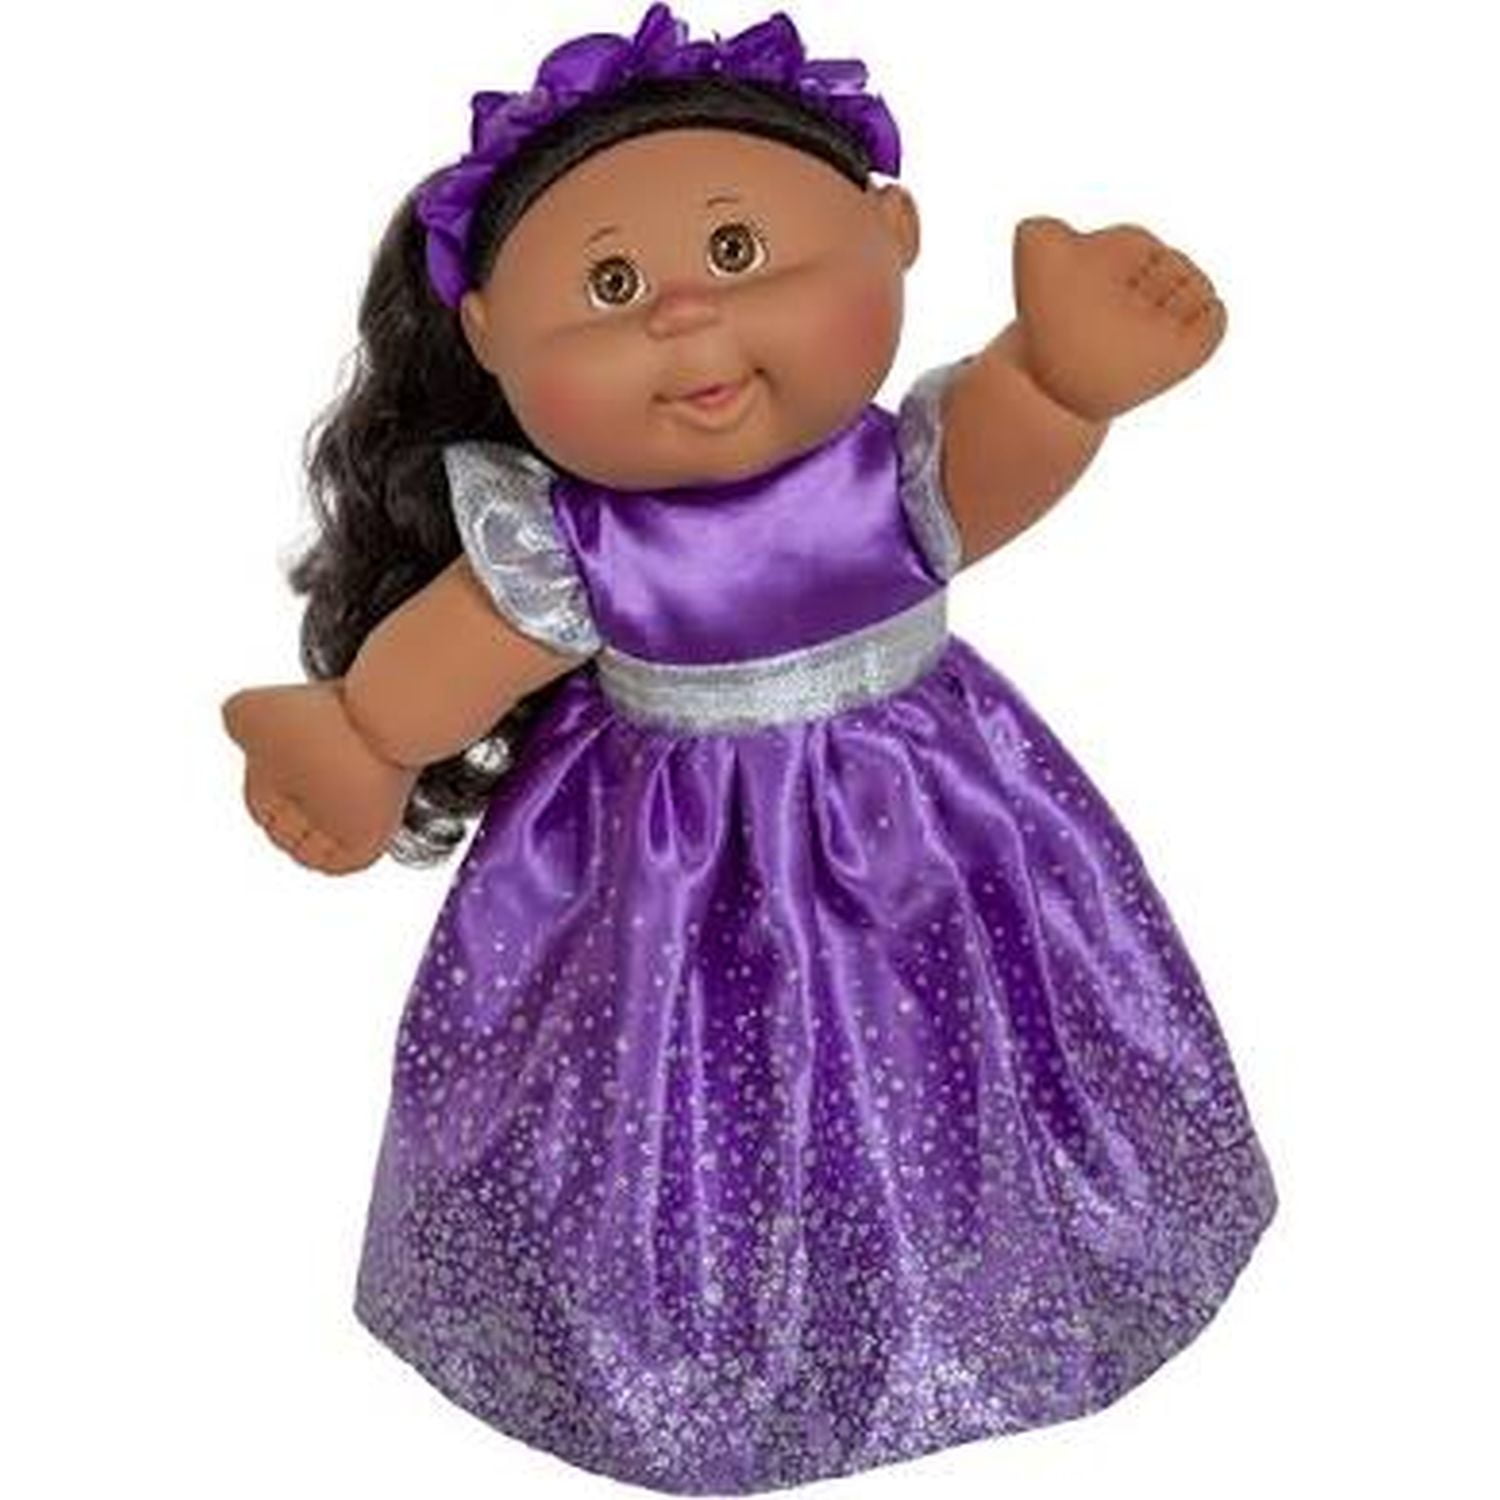 cabbage patch kids 2018